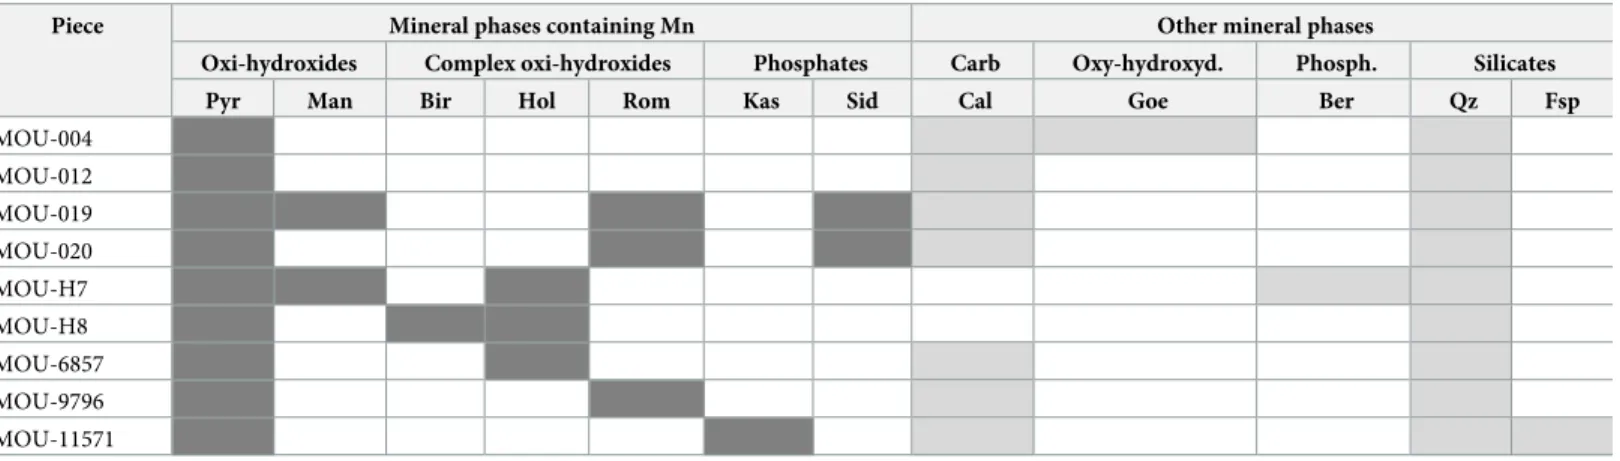 Table 3. Results of XRD analyses of Mn-rich lumps from Le Moustier .